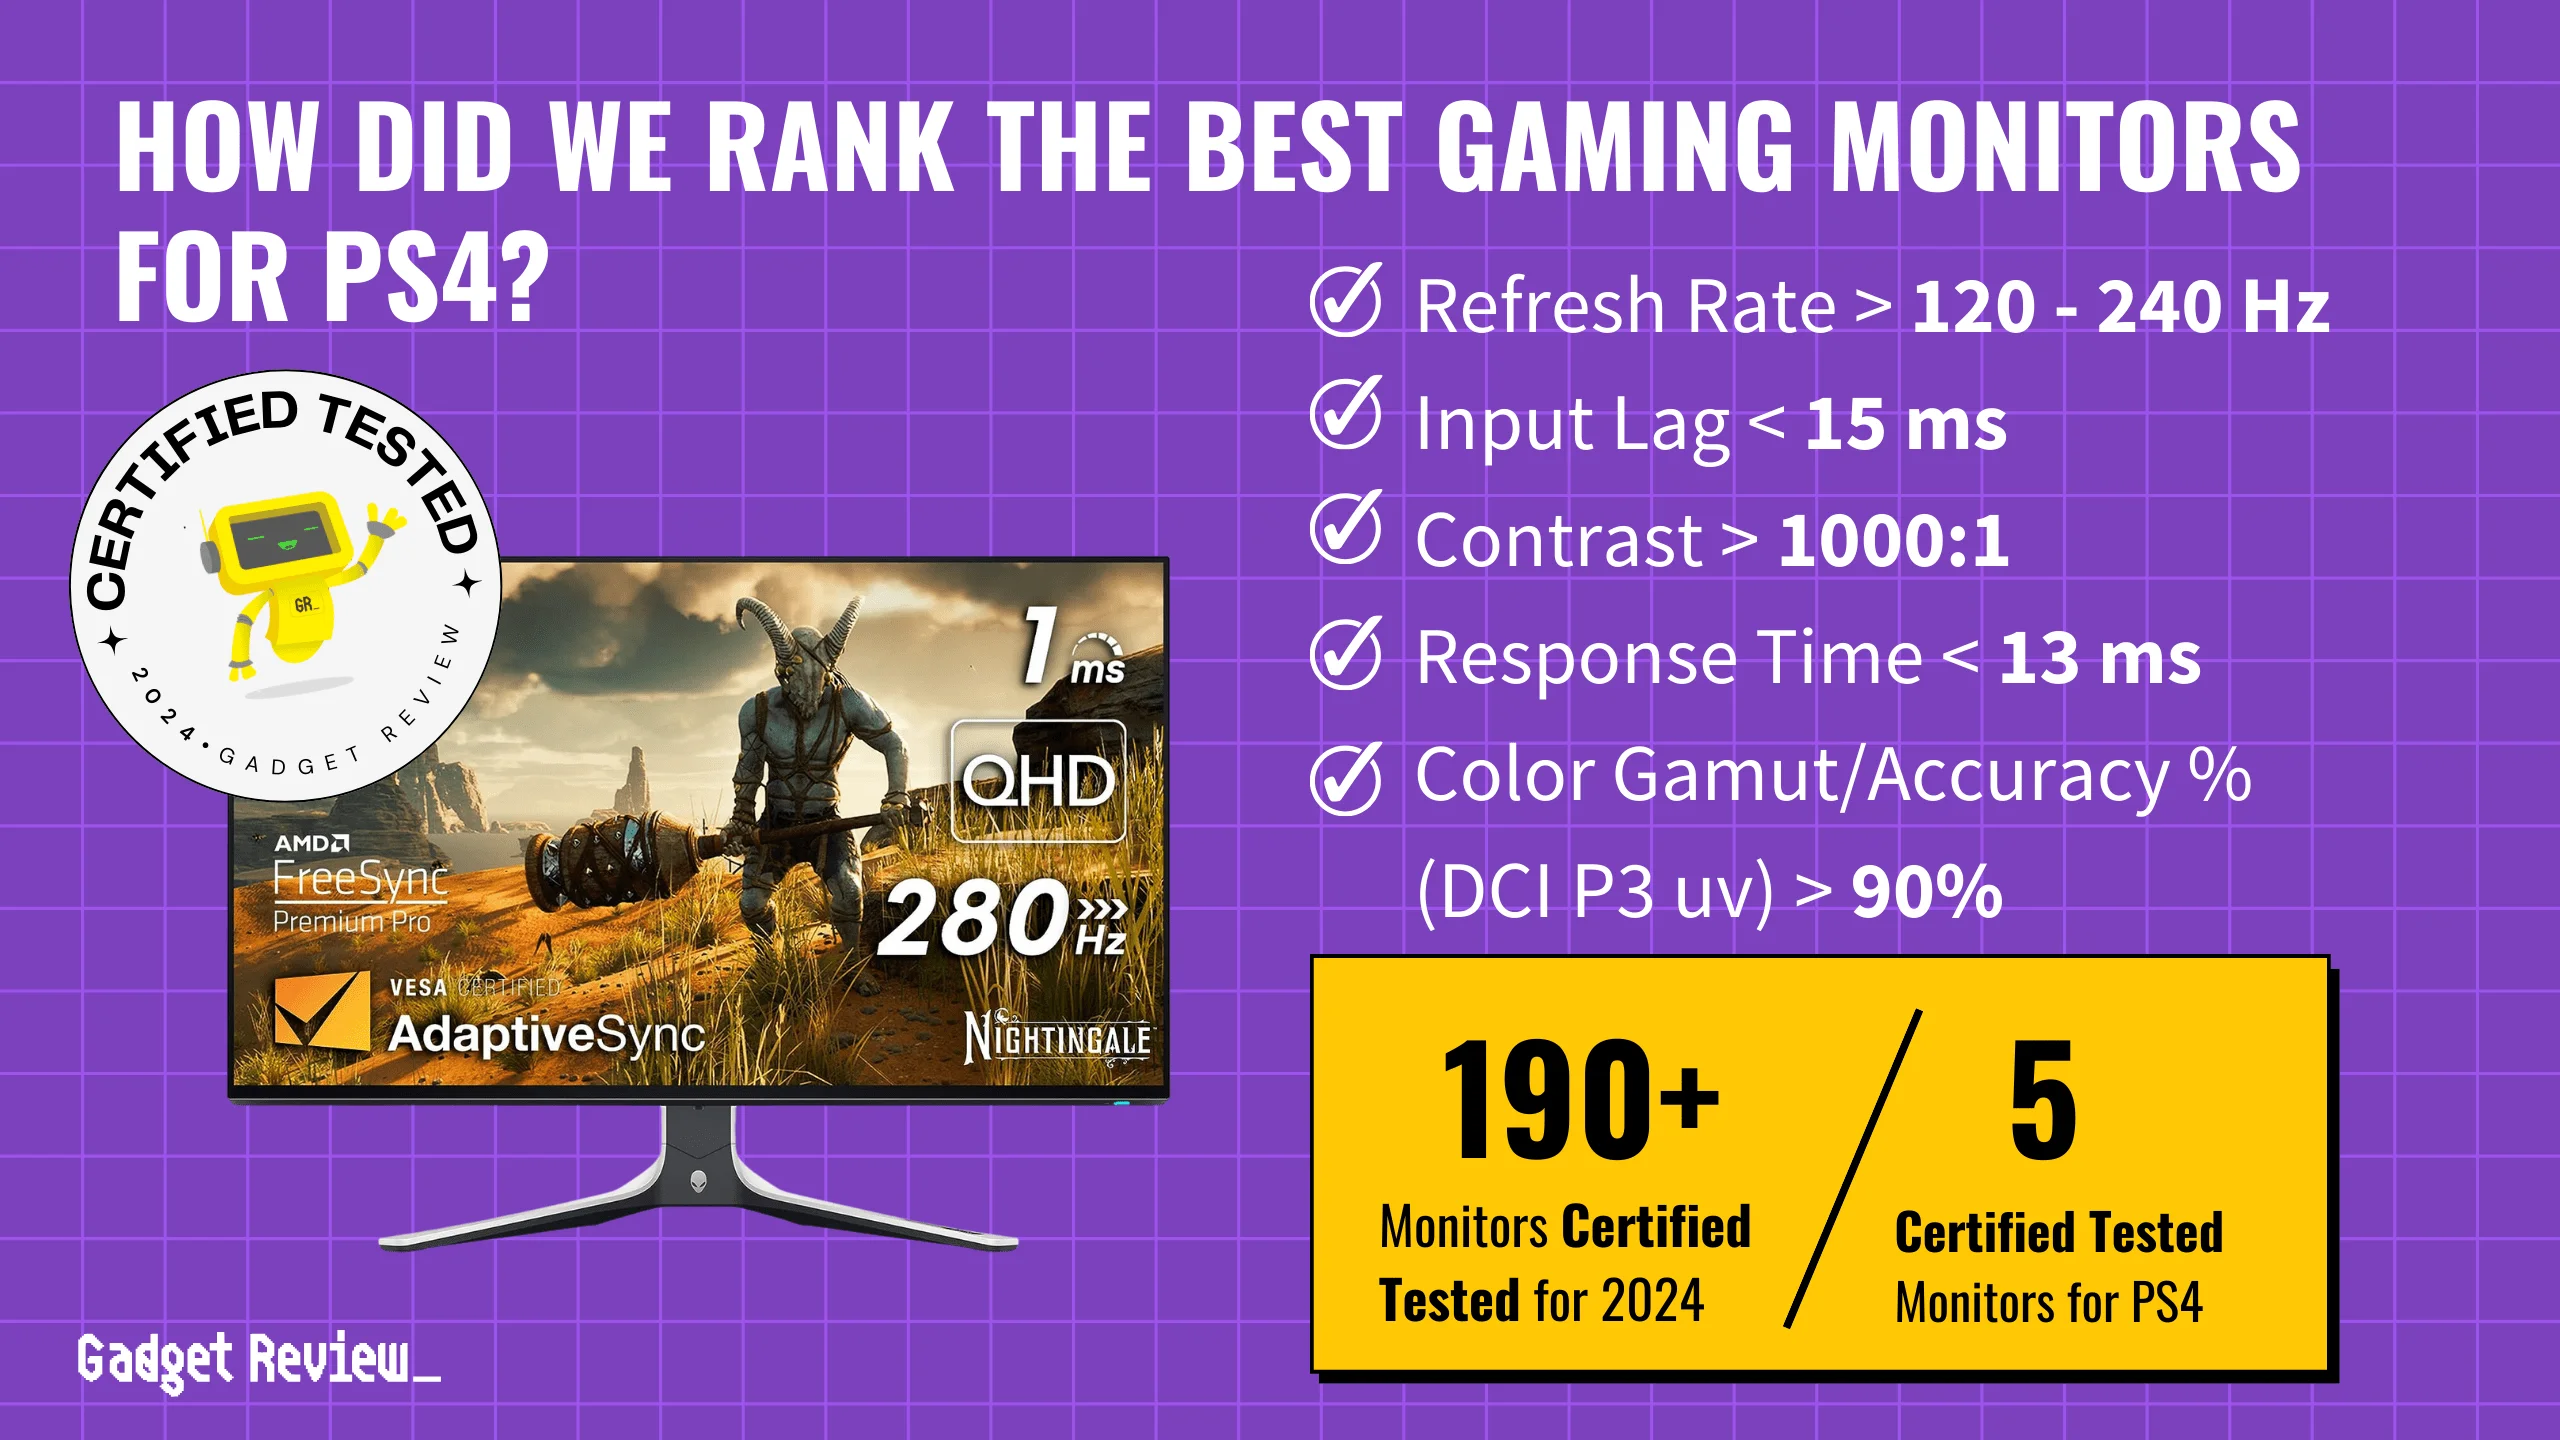 best gaming monitor ps4 guide that shows the top best gaming monitor model